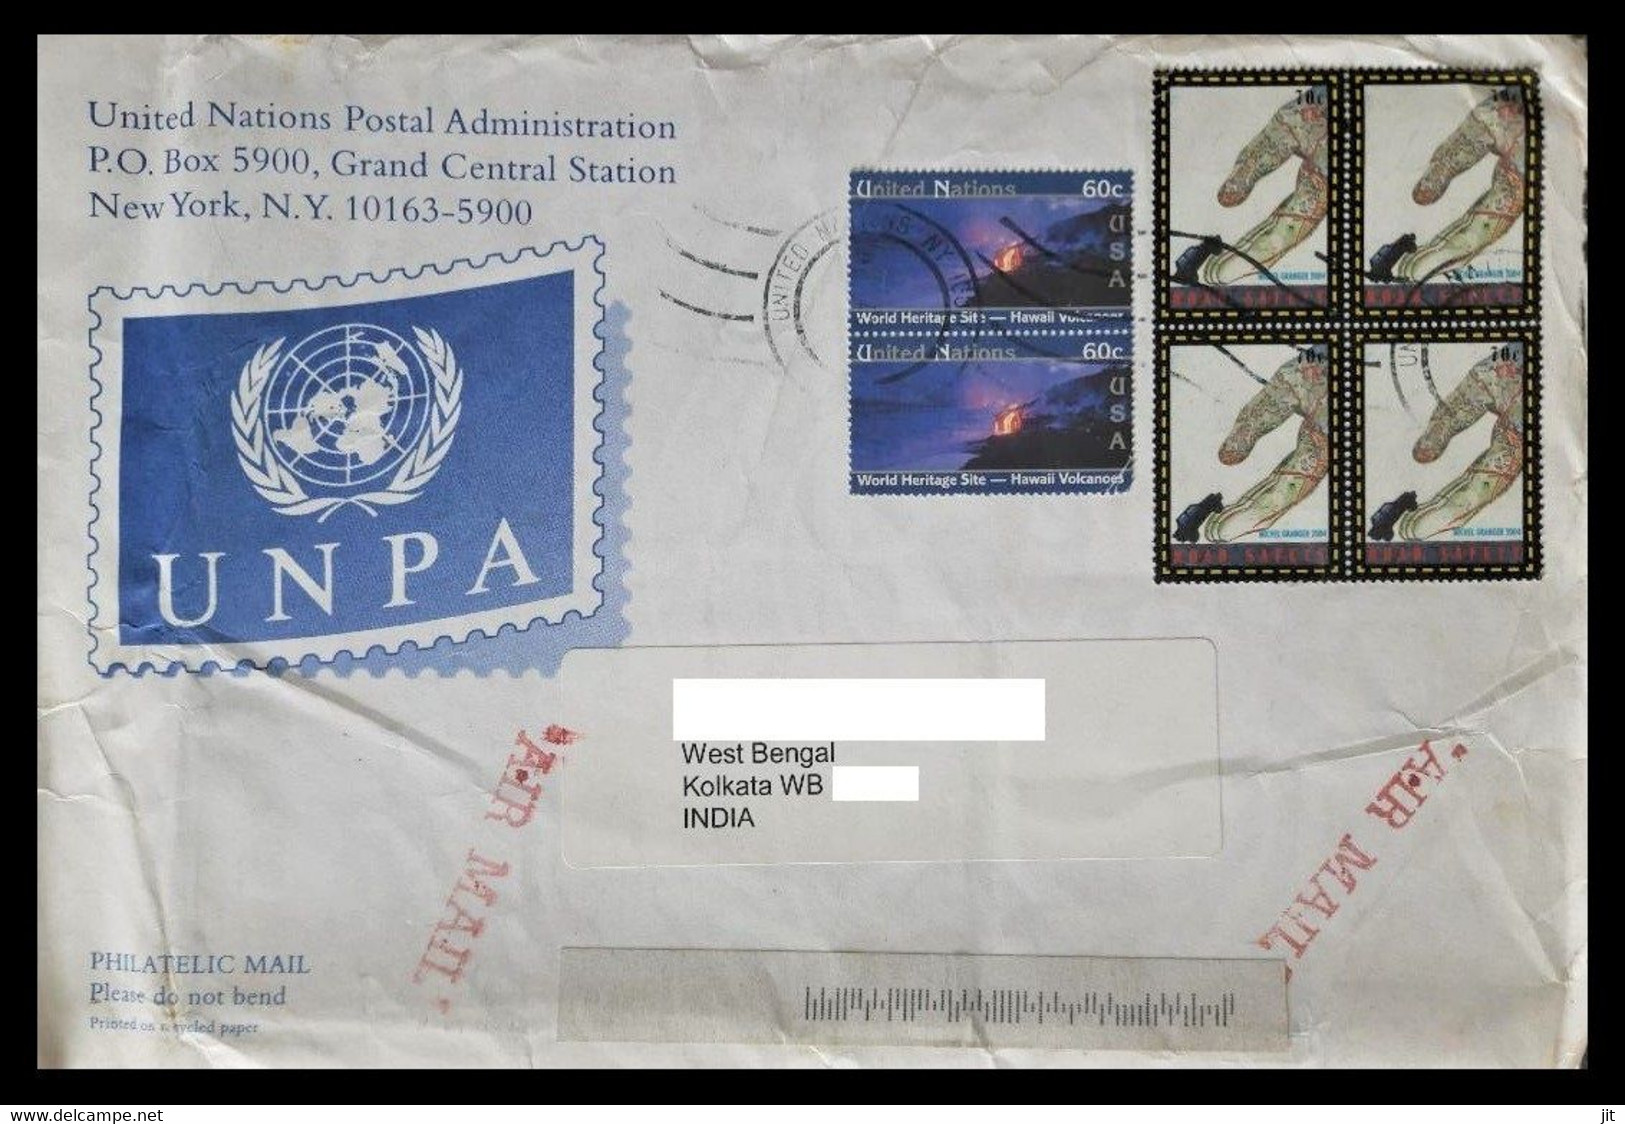 165.UNITED NATIONS 2008 USED COVER TO INDIA WITH STAMPS ,WORLD HERITAGE SITES, ROAD SAFETY. - Covers & Documents